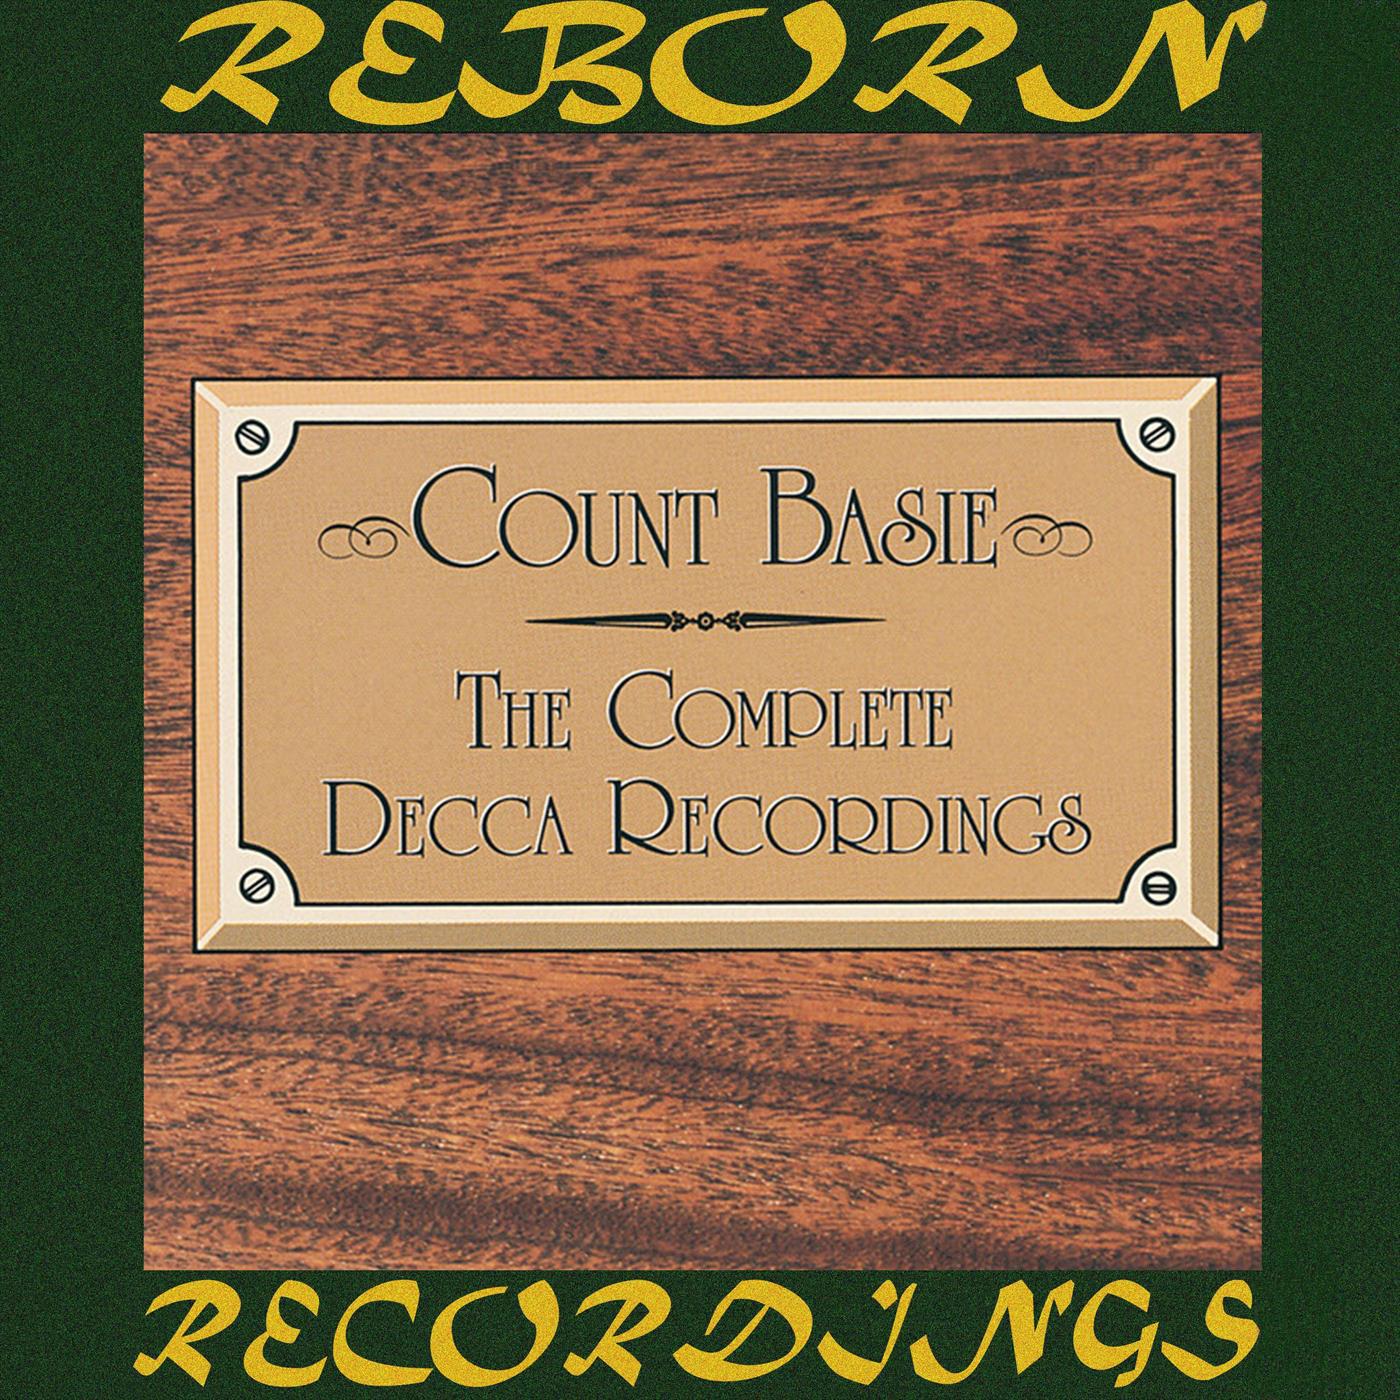 The Complete Decca Recordings (1937-1939) (HD Remastered)